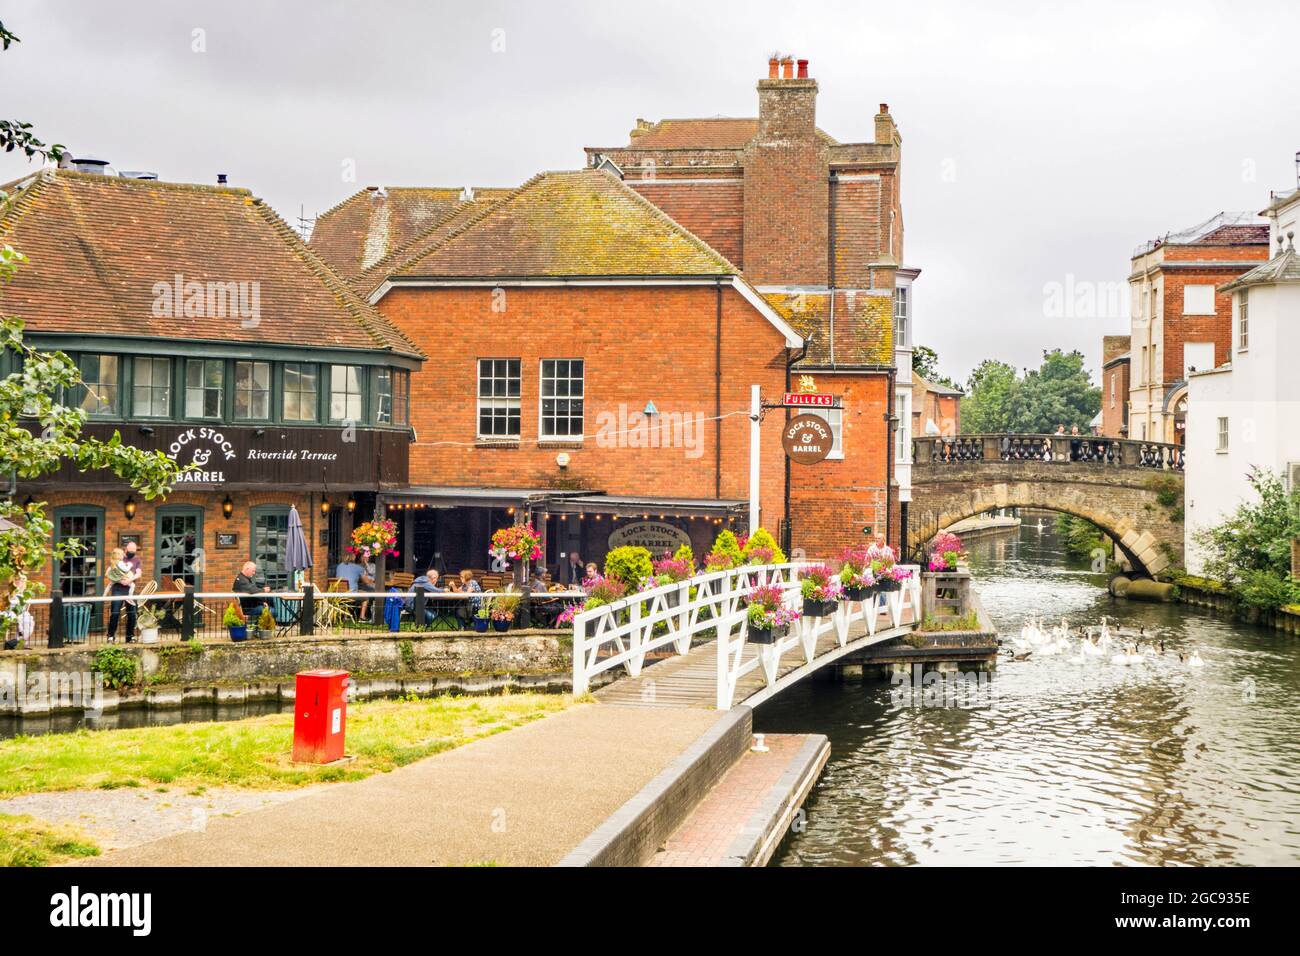 Swans on The Kennet and Avon canal as it passes through the Berkshire town of Newbury Stock Photo